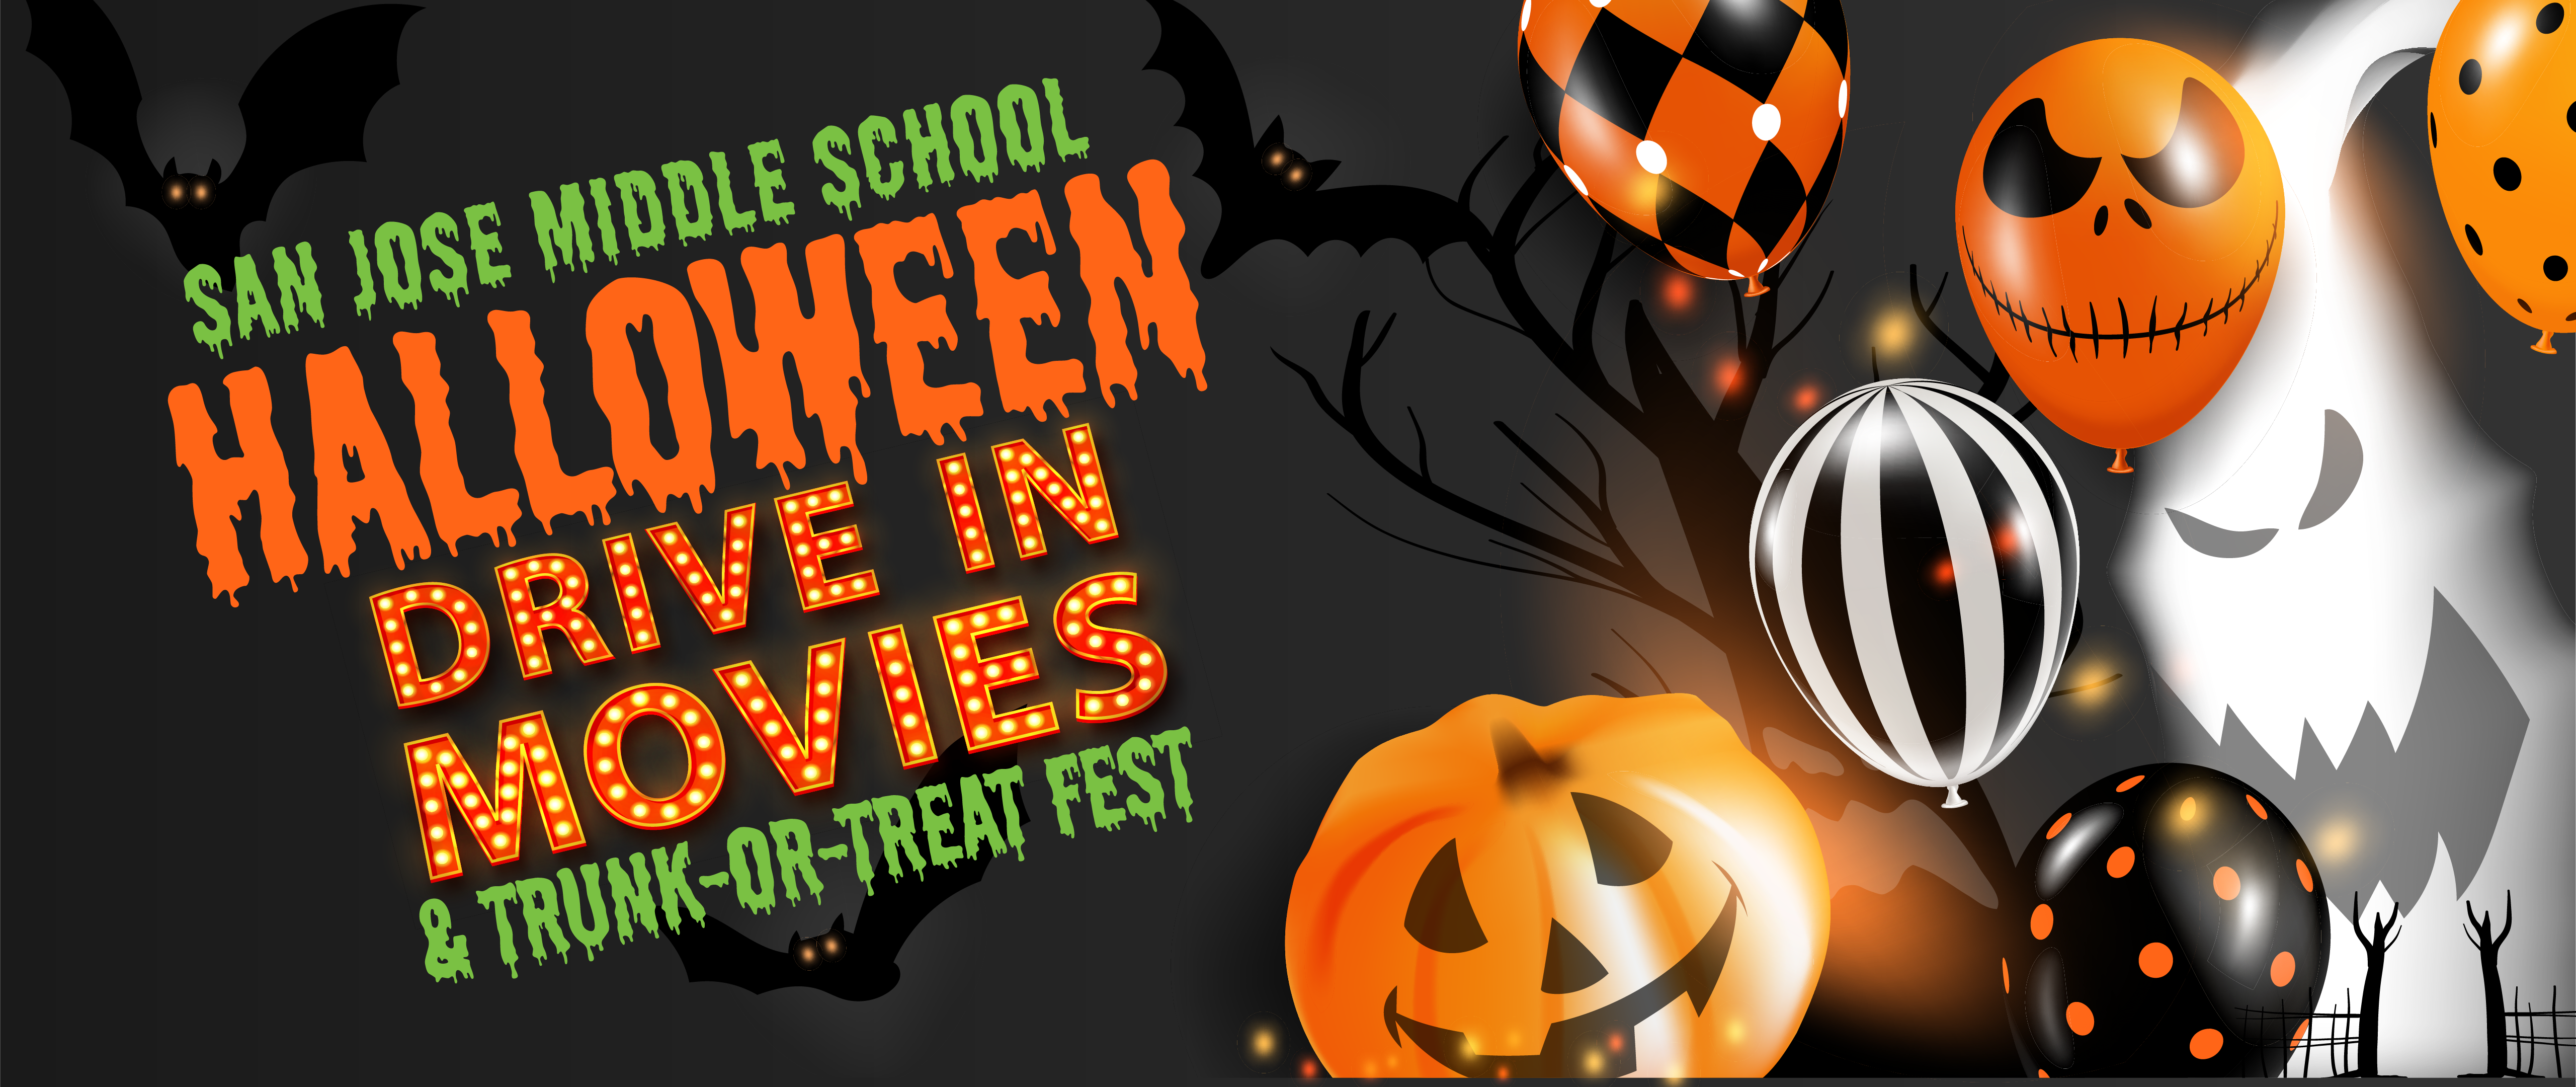 Halloween Drive In Movies & Trunk-or-Treat Fest